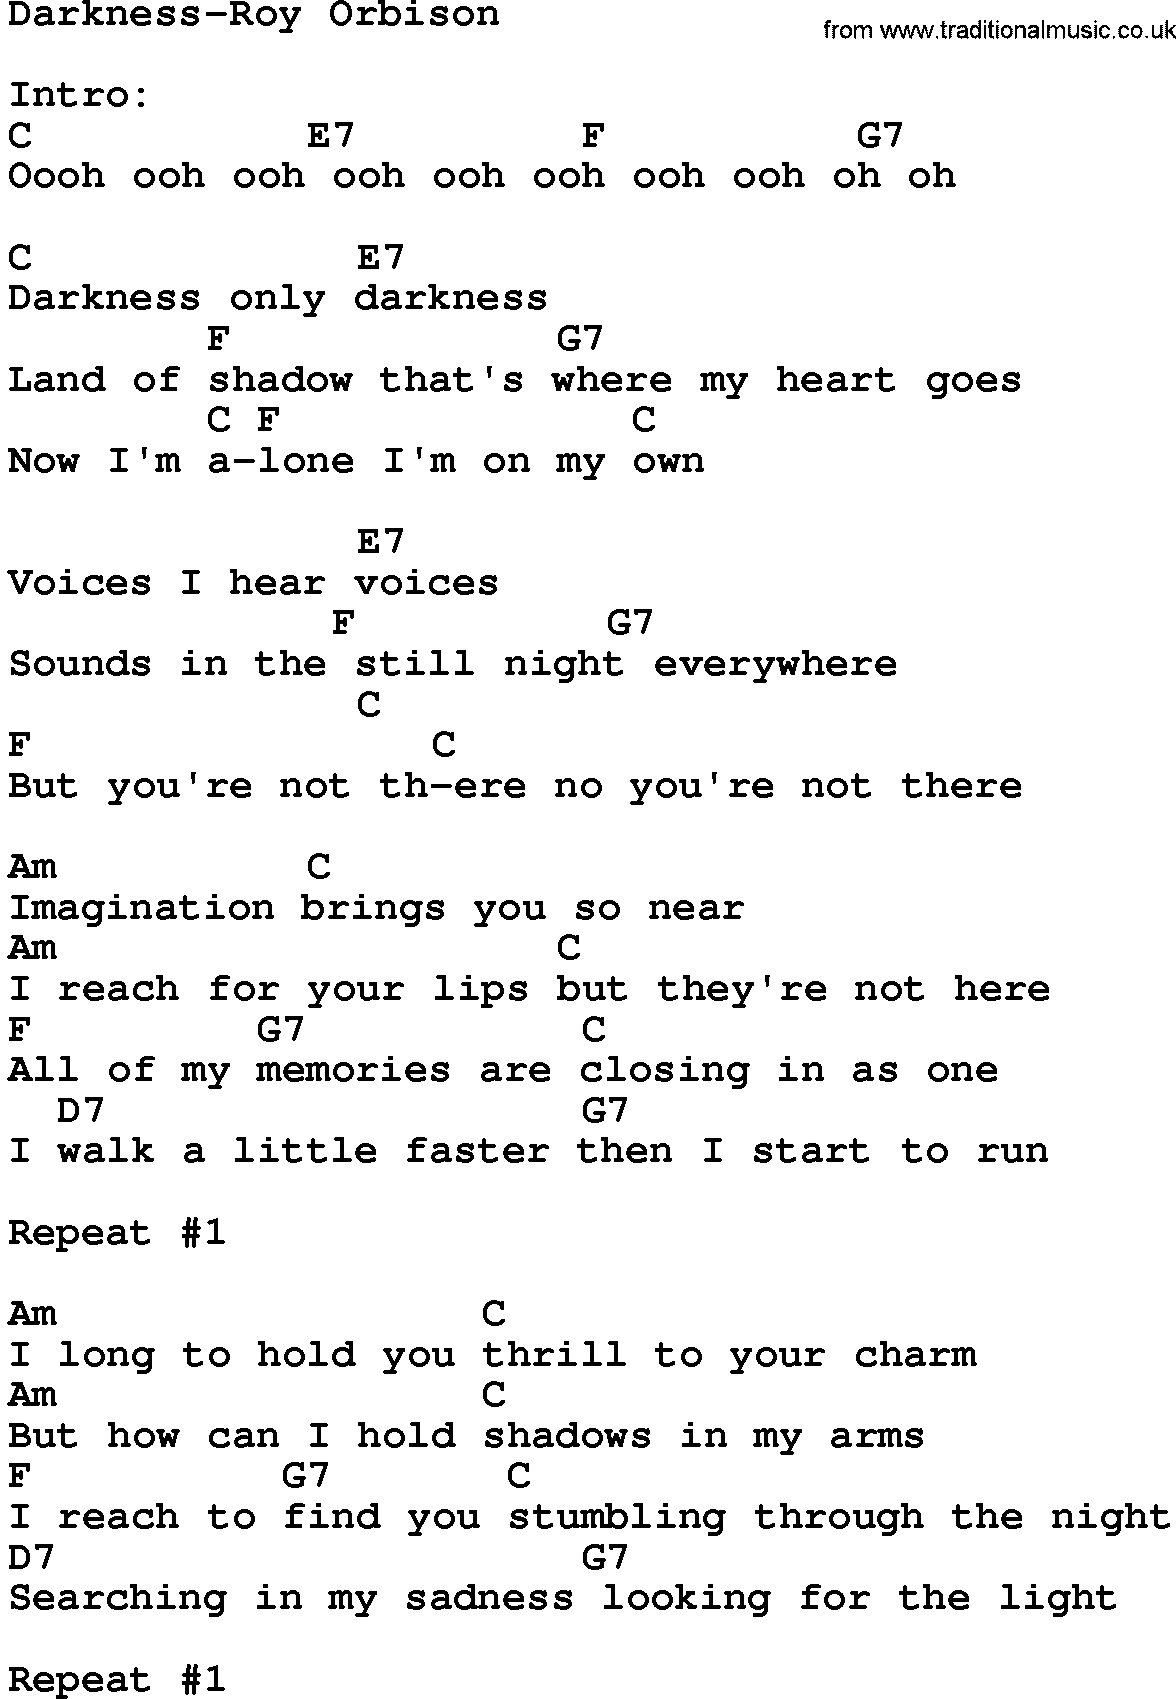 Country music song: Darkness-Roy Orbison lyrics and chords